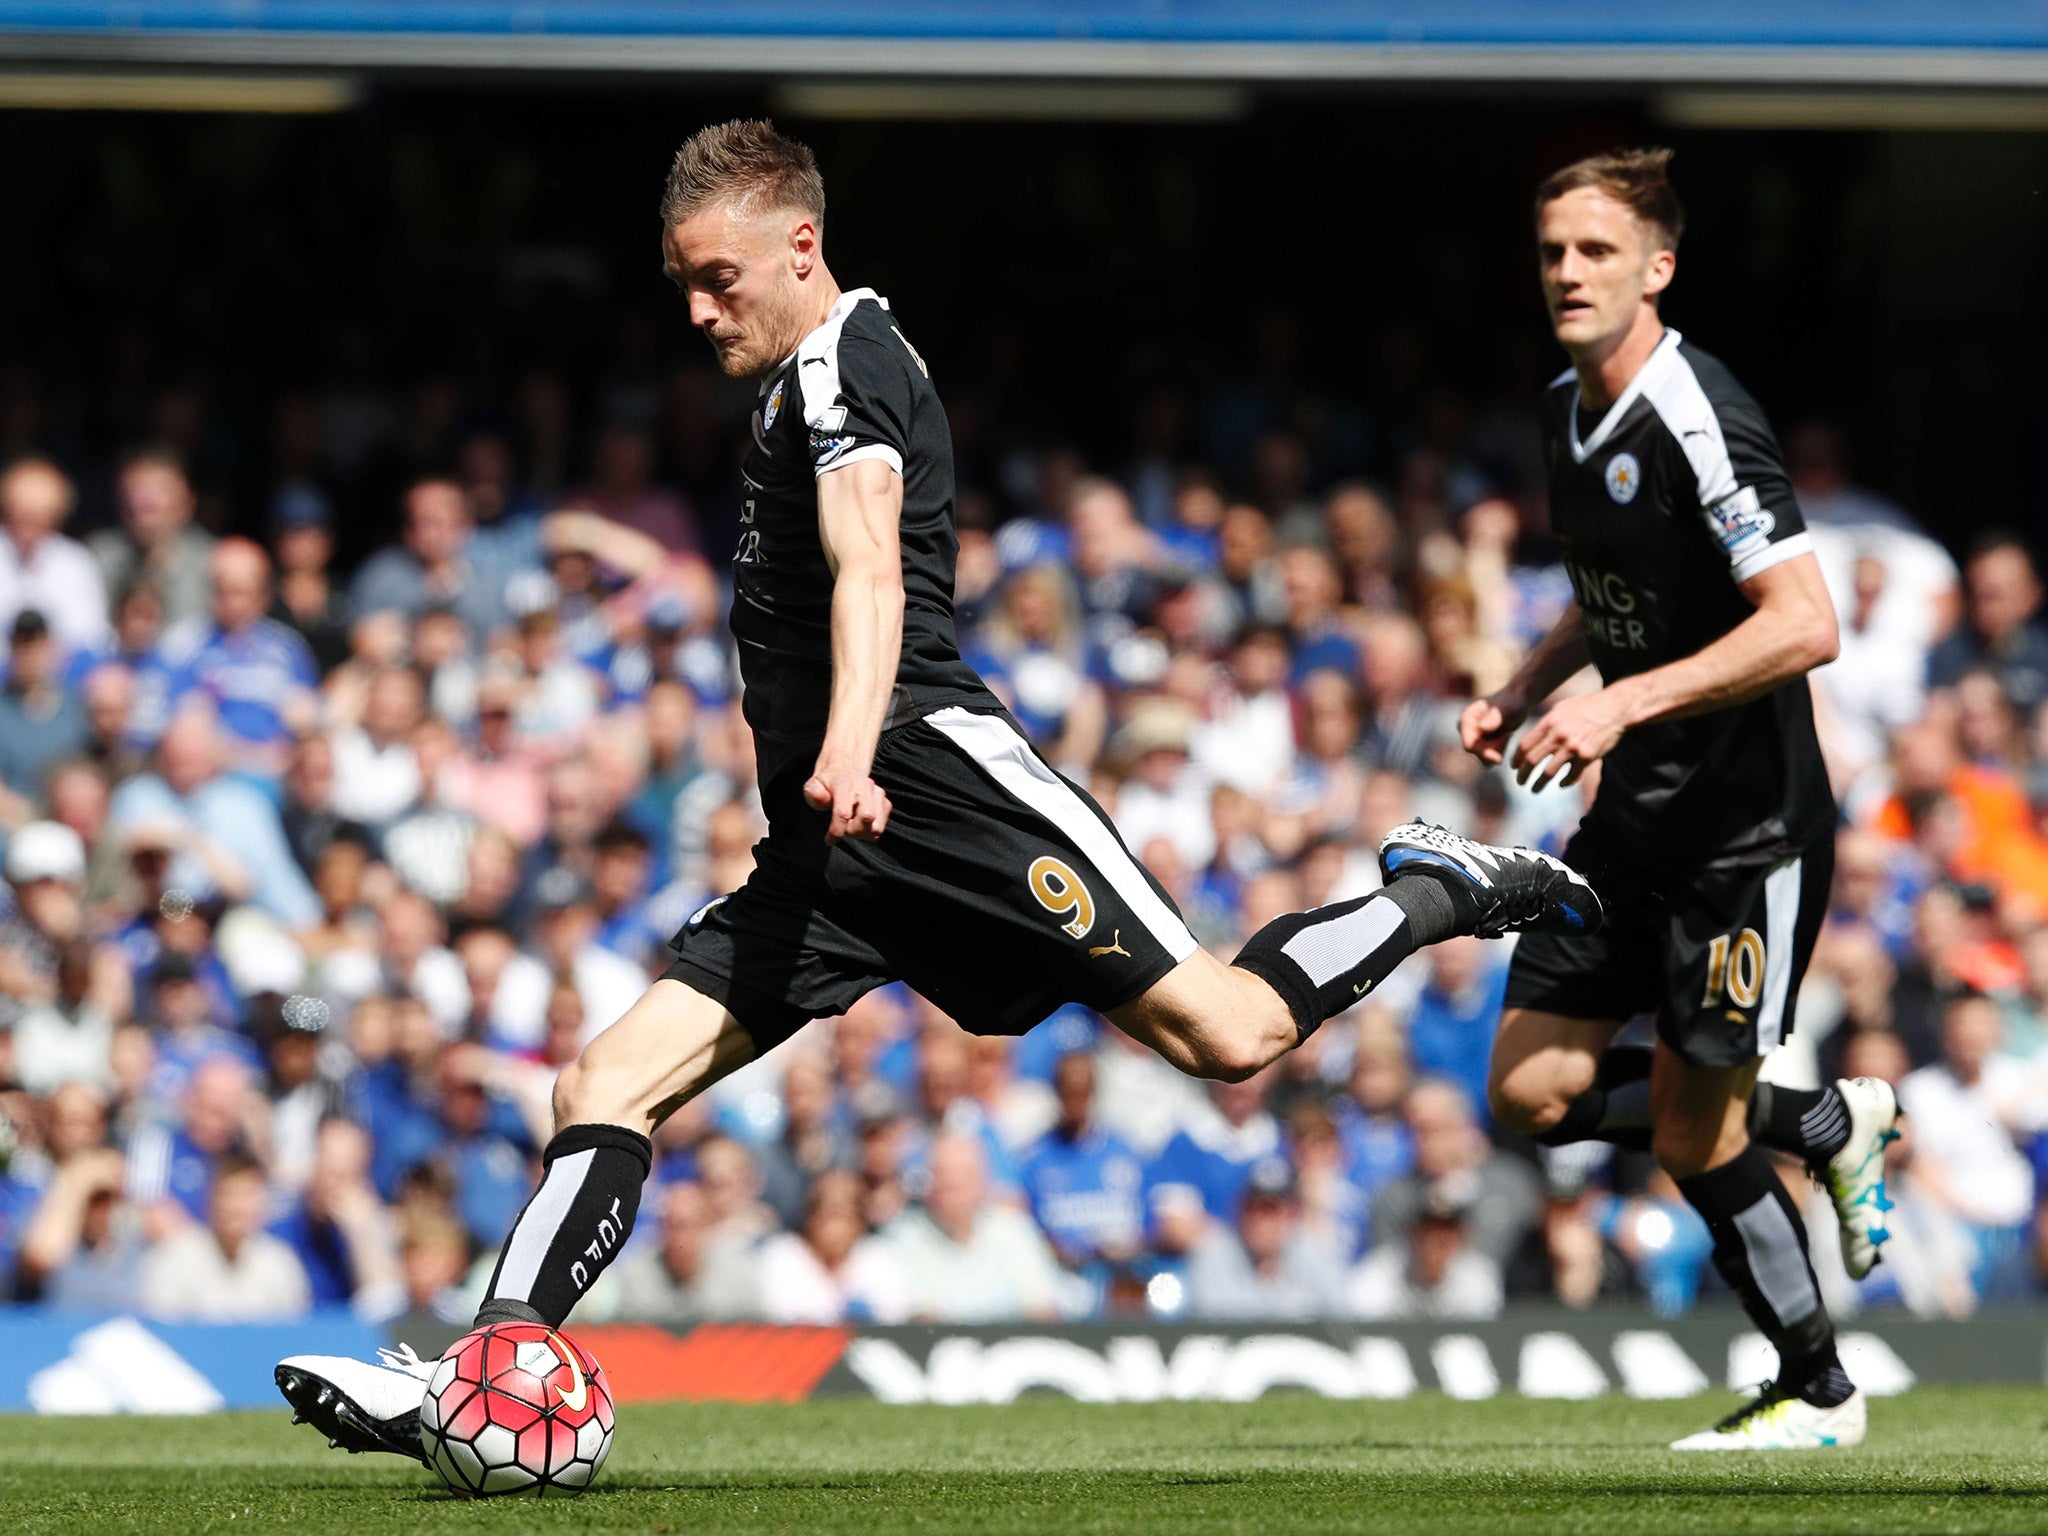 Jamie Vardy was not included in Garth Crooks' team of the season